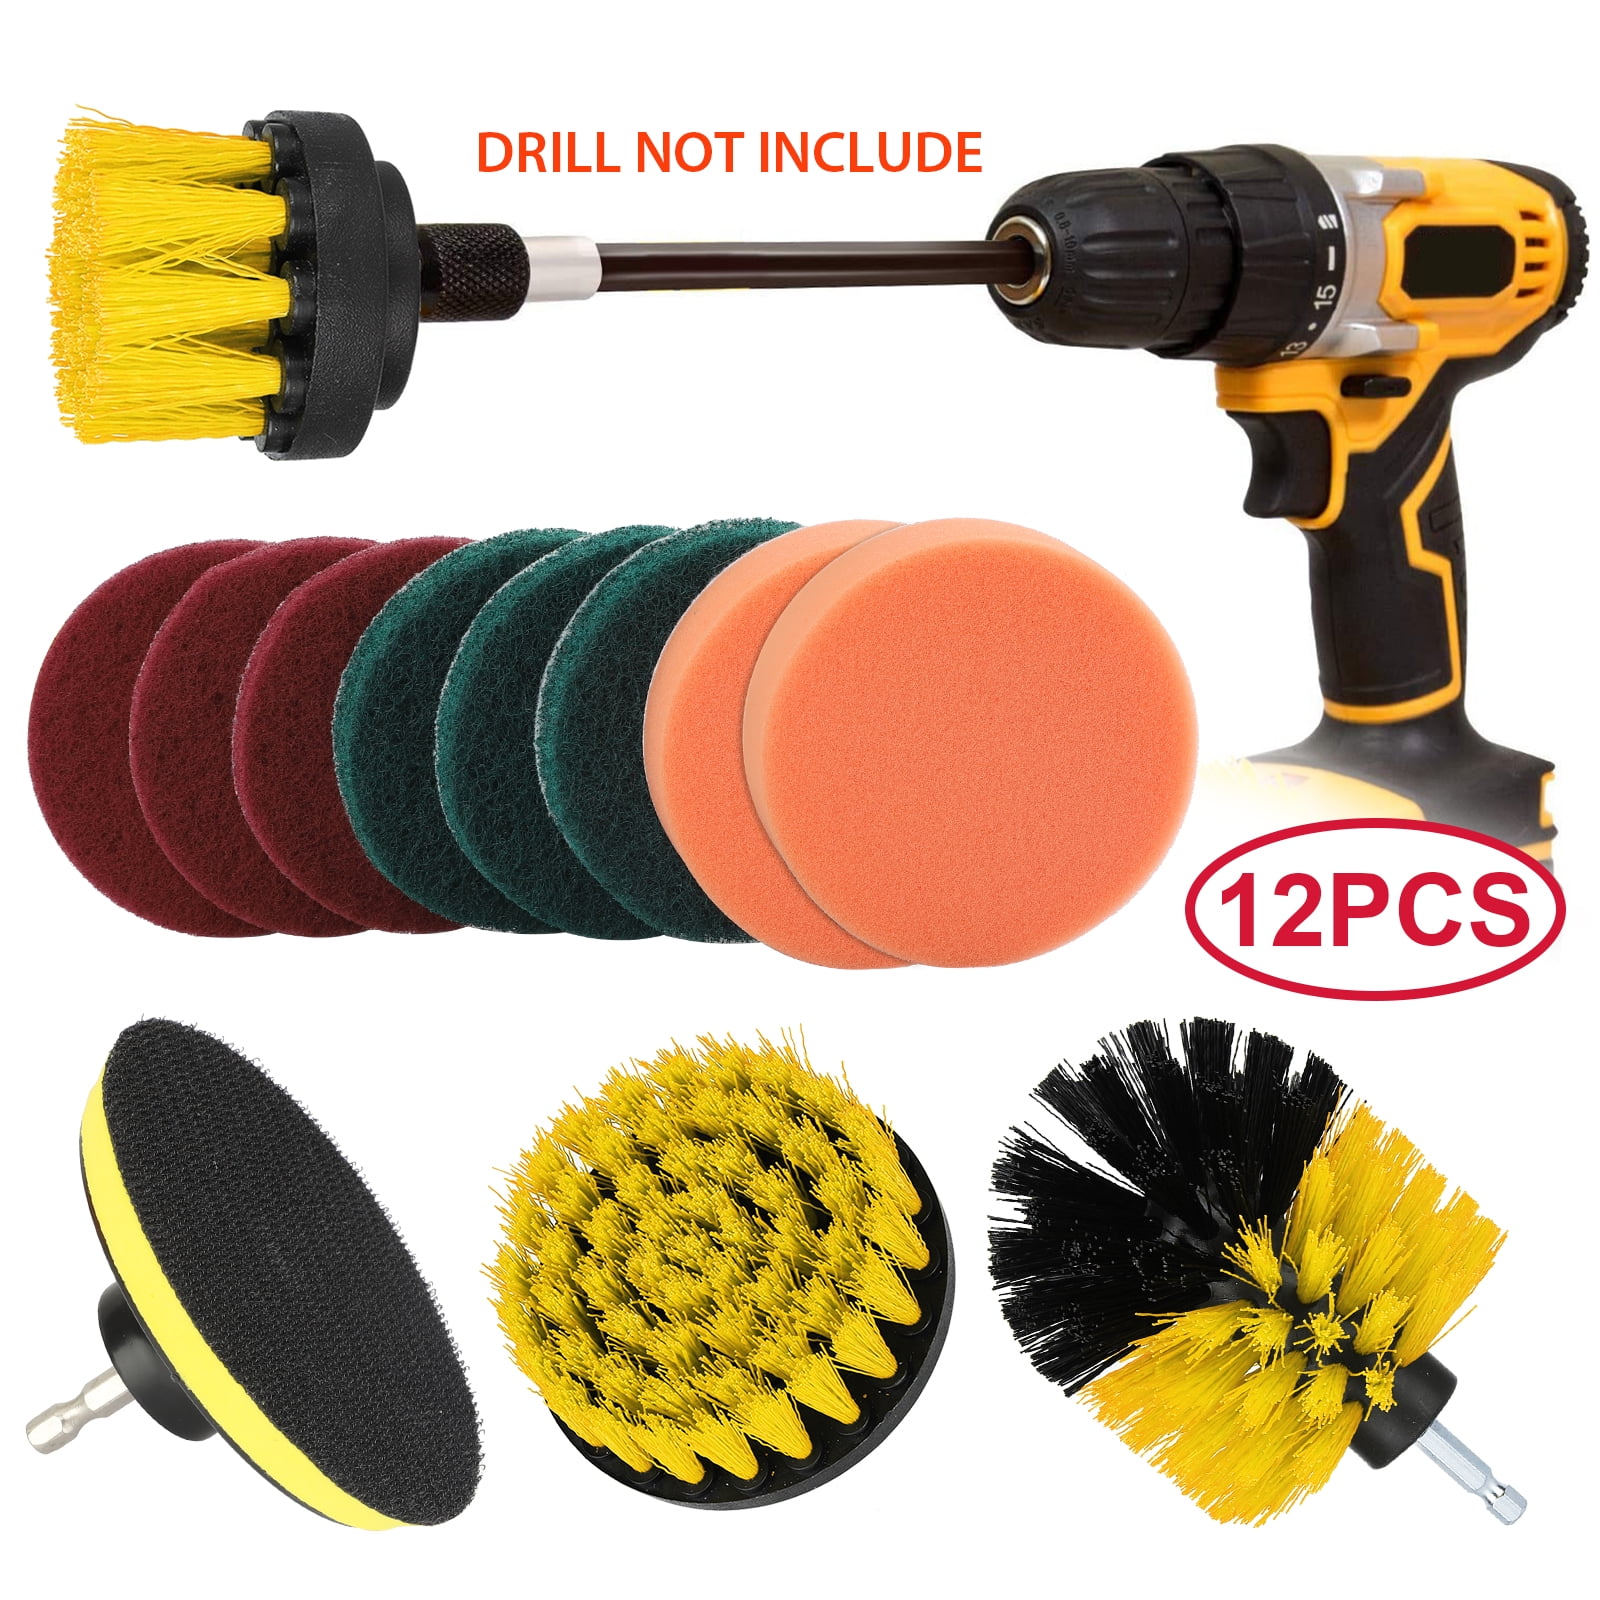 Drill Brush Set Power Scrubber Brushes Cleaner For Car Carpet Wall Tile Cleaning 